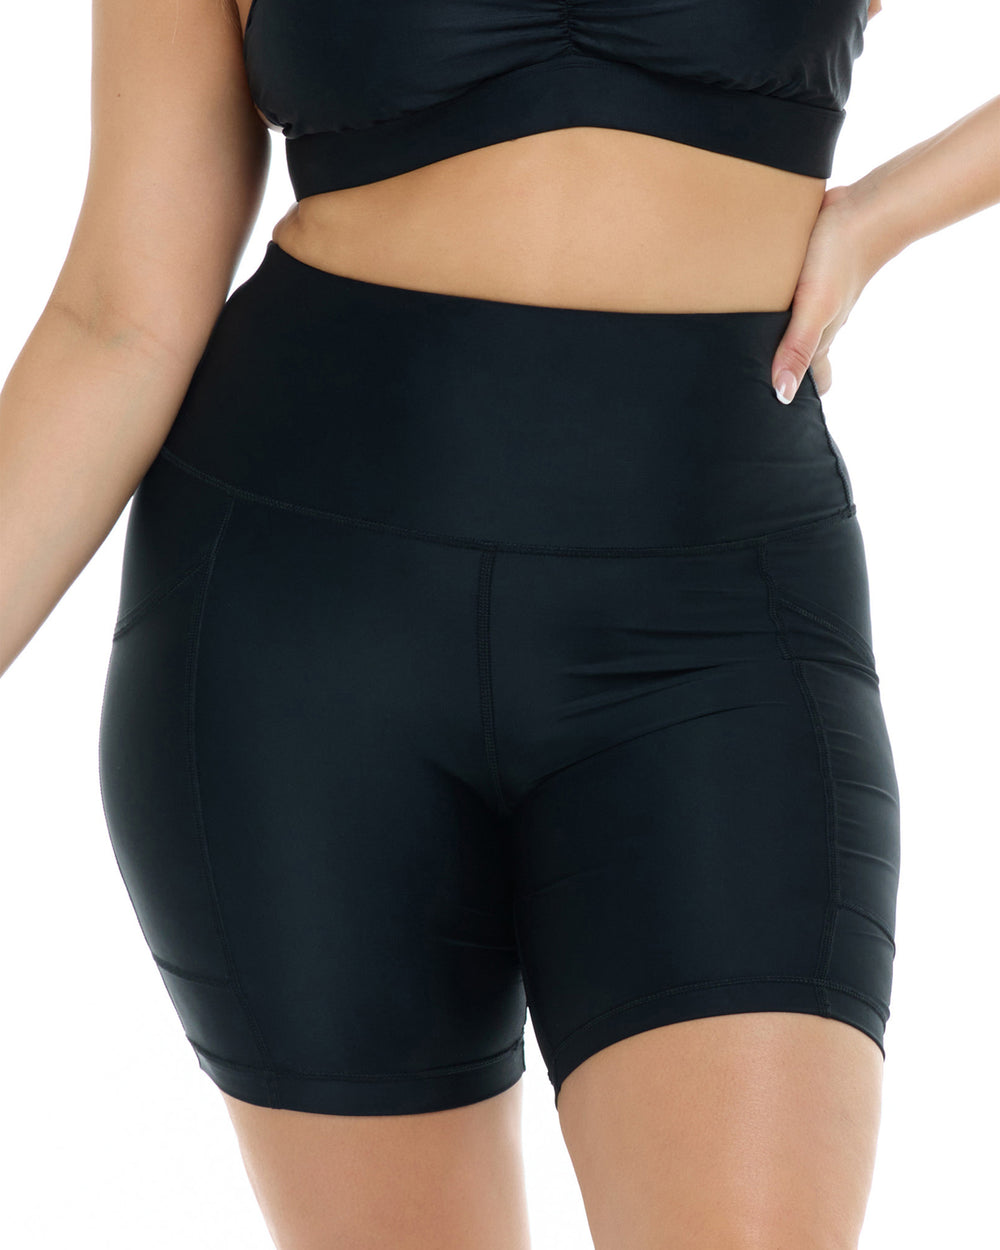 Smoothies Spin Plus Size Short - Black